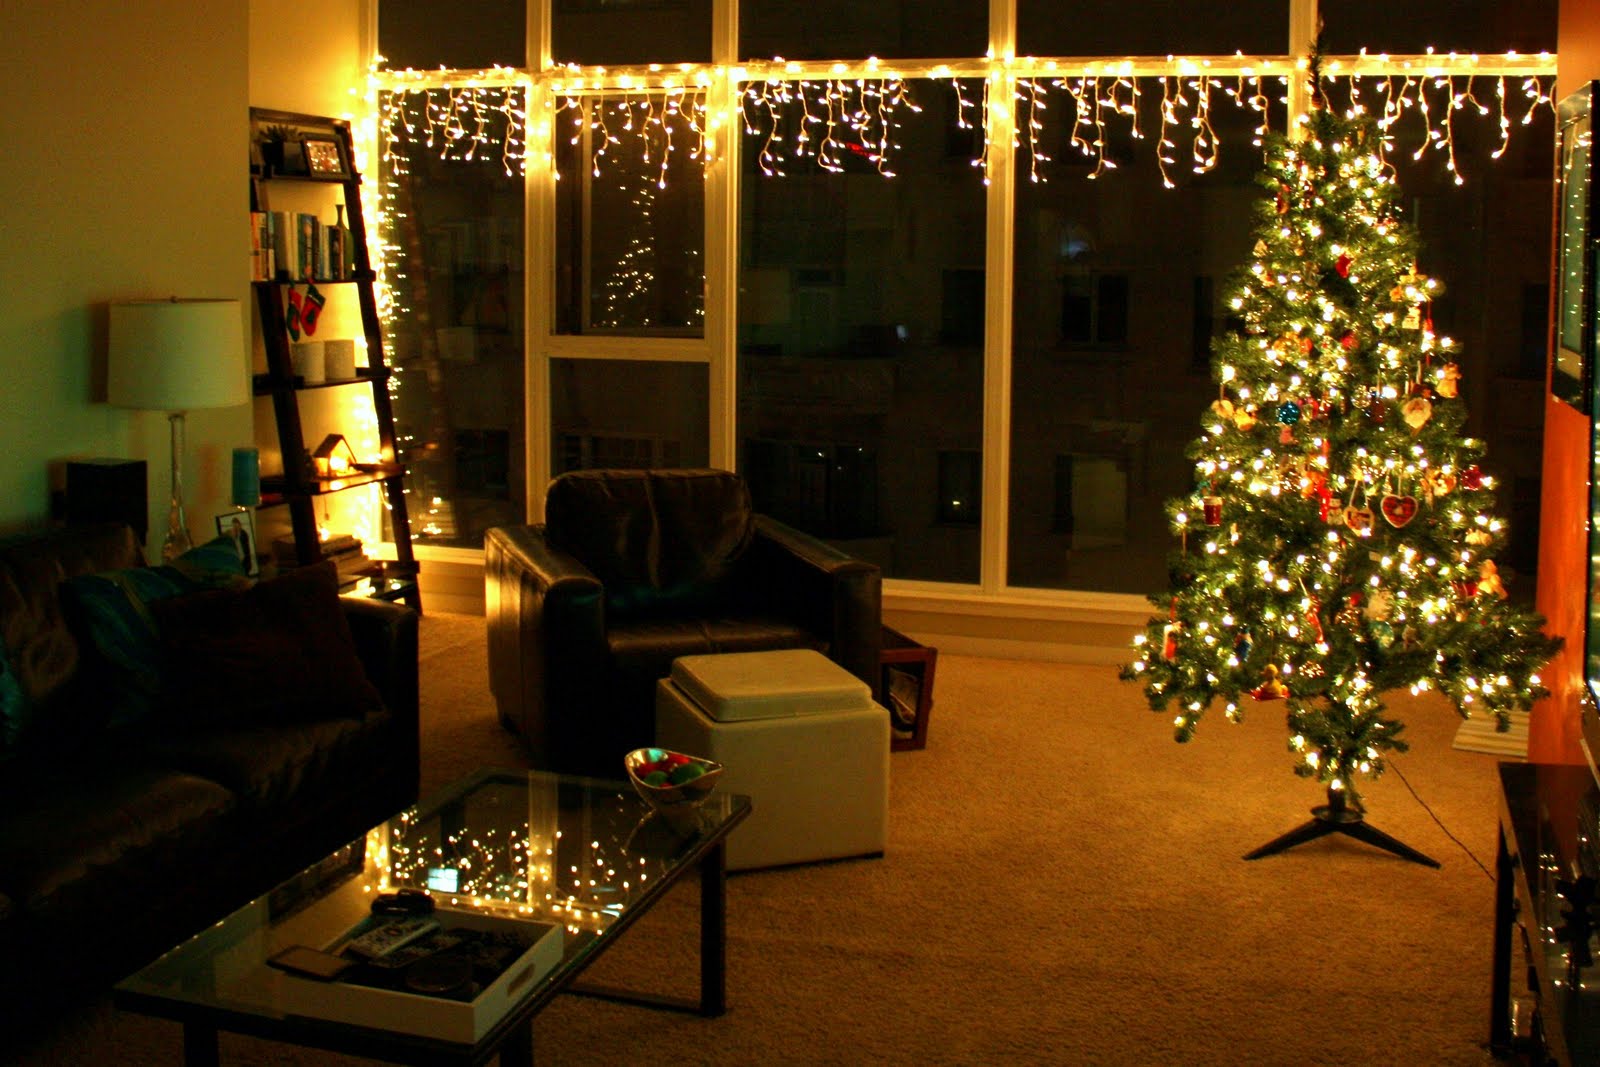 111440 Living Room Christmas Lights In Our Living Room Are Our Window Lights And Our Main Tree On Interior Design Ideas 